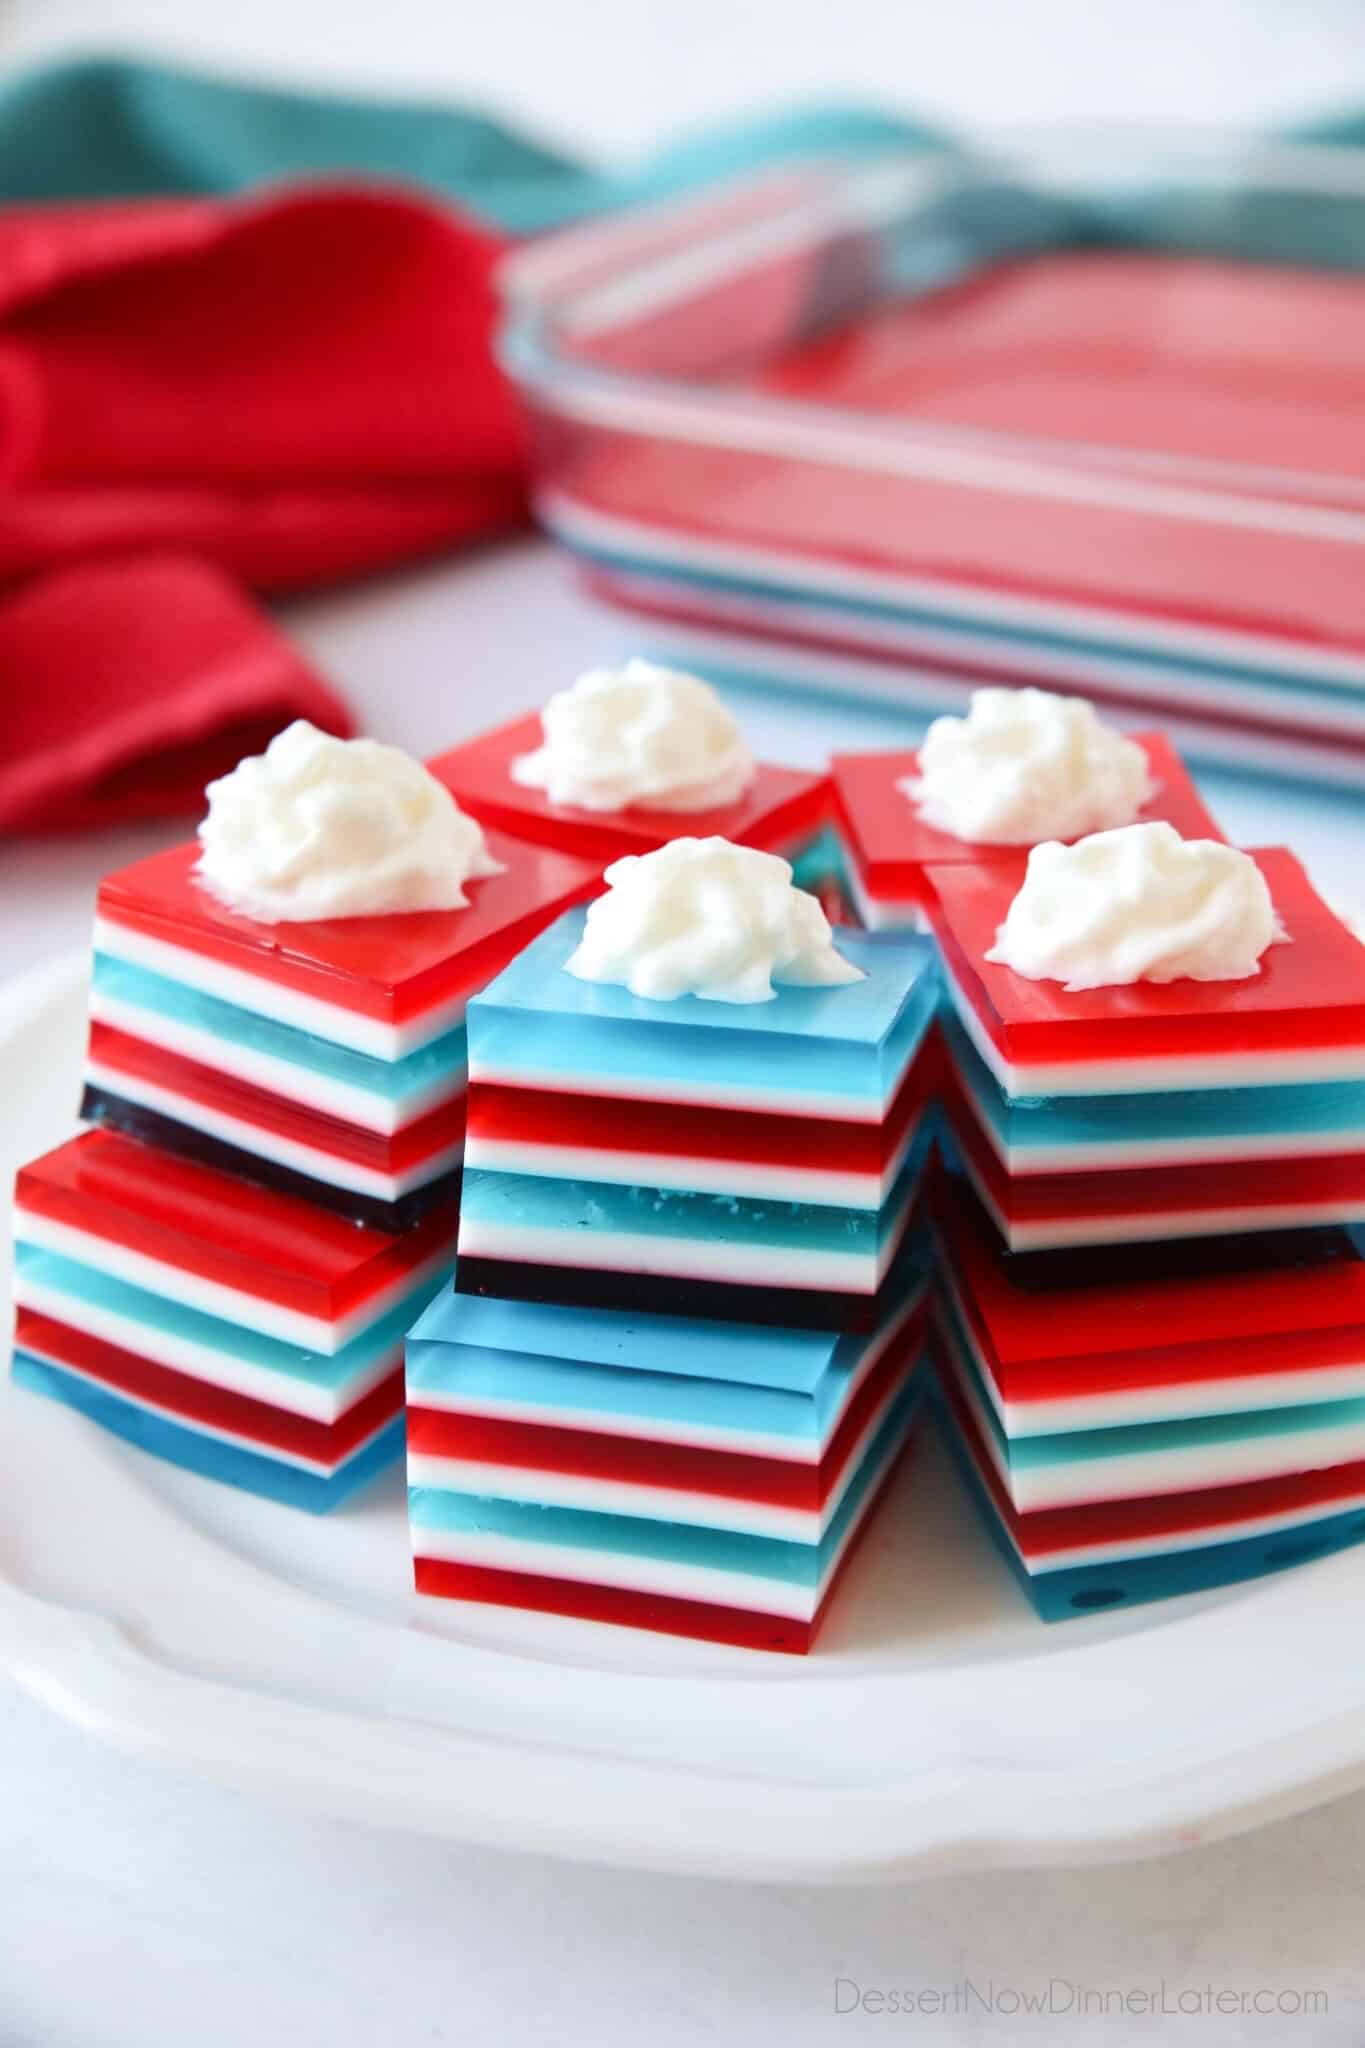 Red White and Blue Jello (4th of July Dessert) | Dessert Now Dinner Later